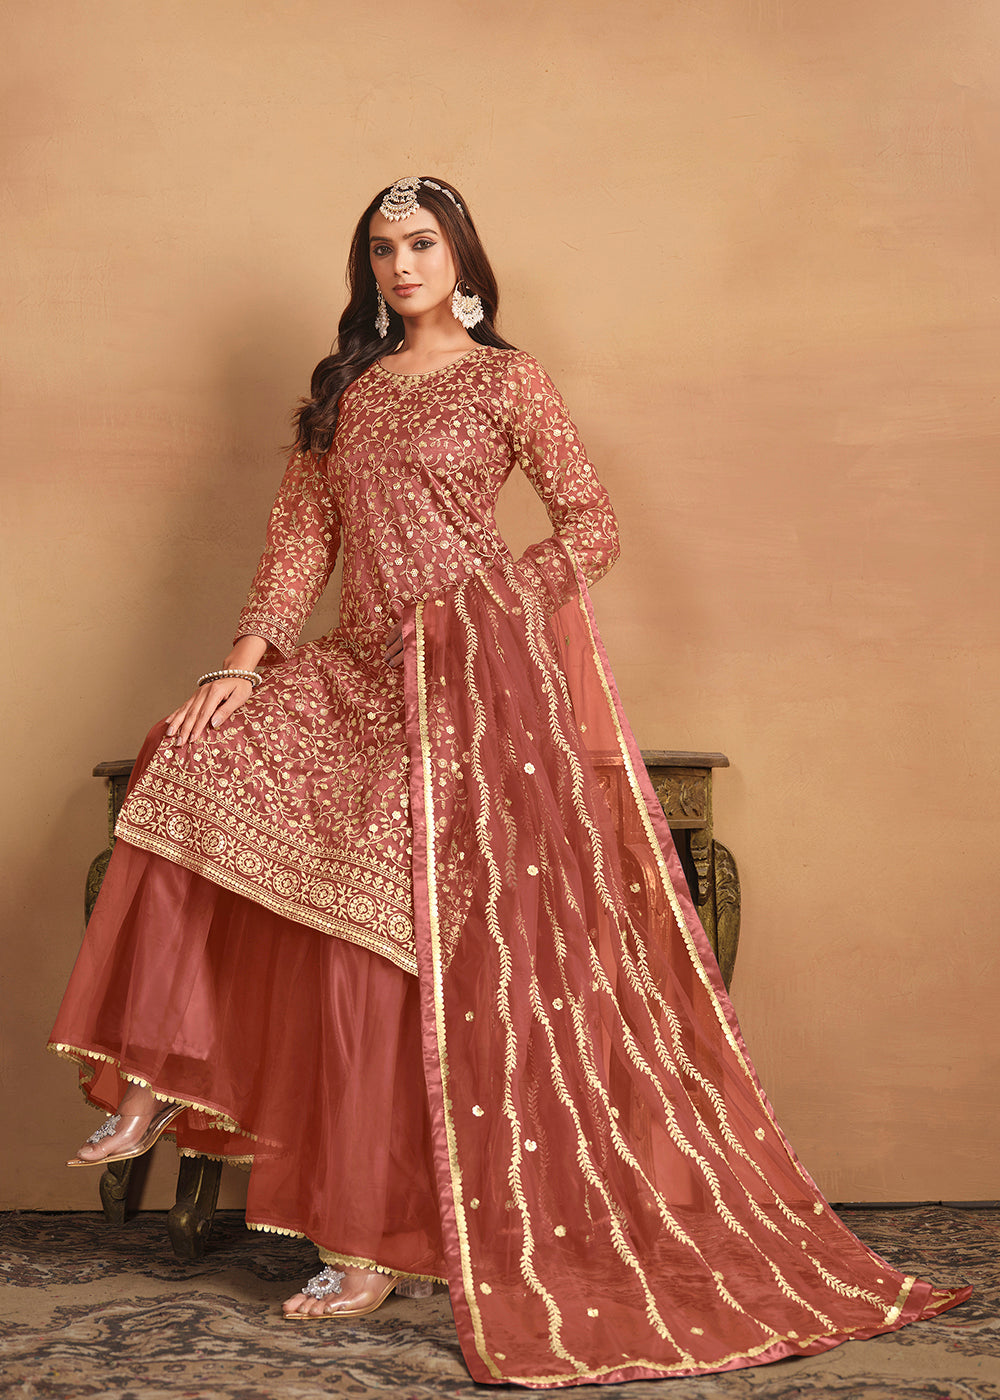 Shop Now Net Rust Orange Embroidered Gharara Style Suit Online at Empress Clothing in USA, UK, Canada, Italy & Worldwide.